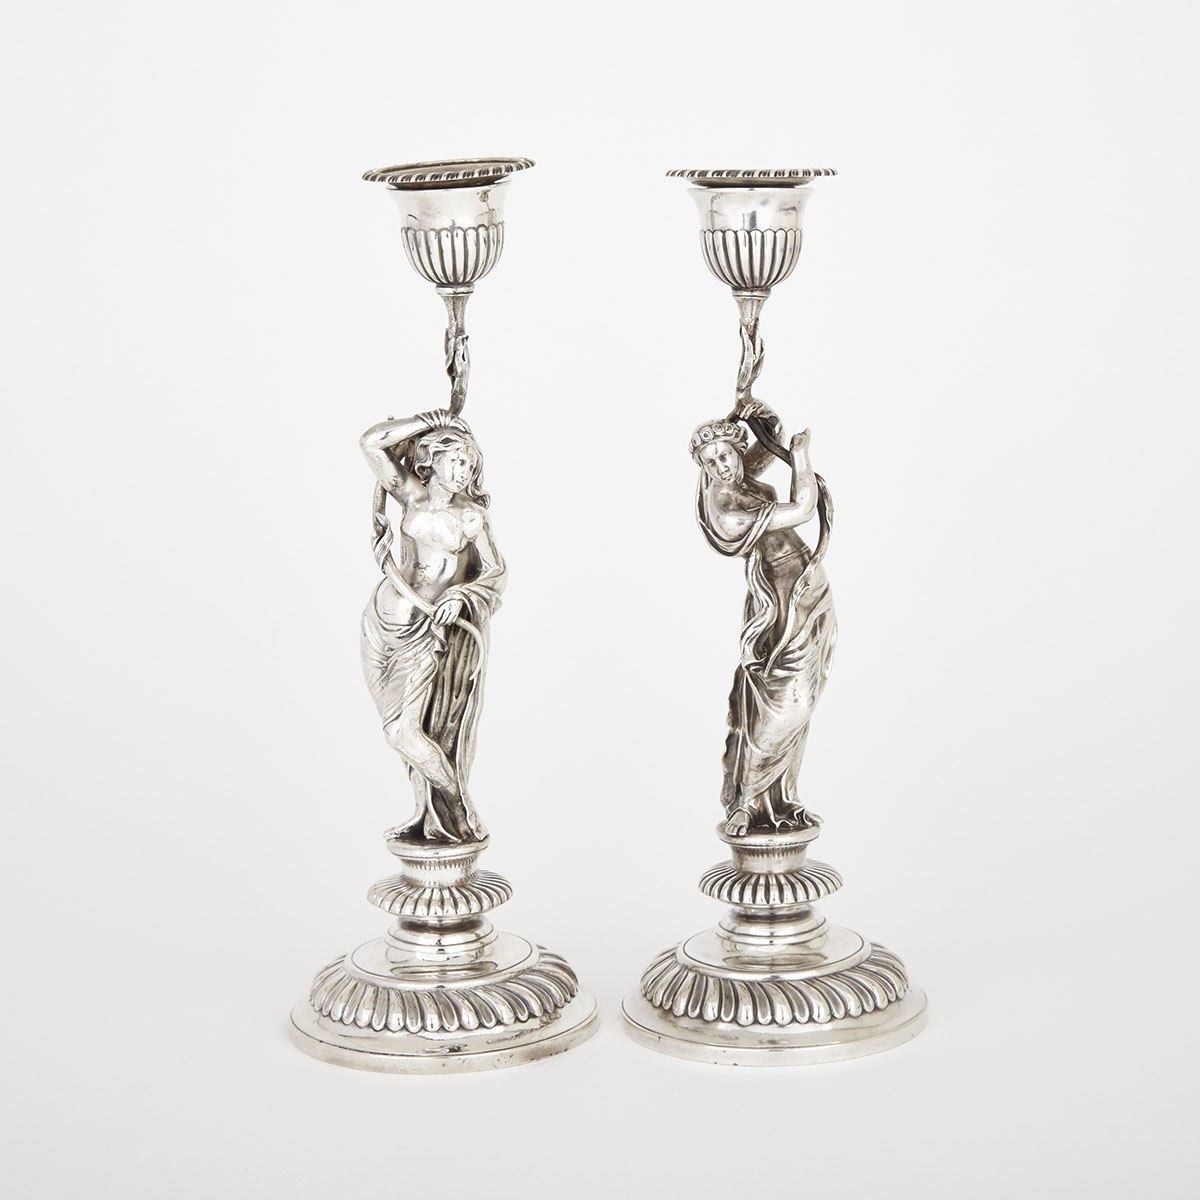 Pair of Victorian Silver Figural Table Candlesticks, Edwin Charles Purdie, London, 1895